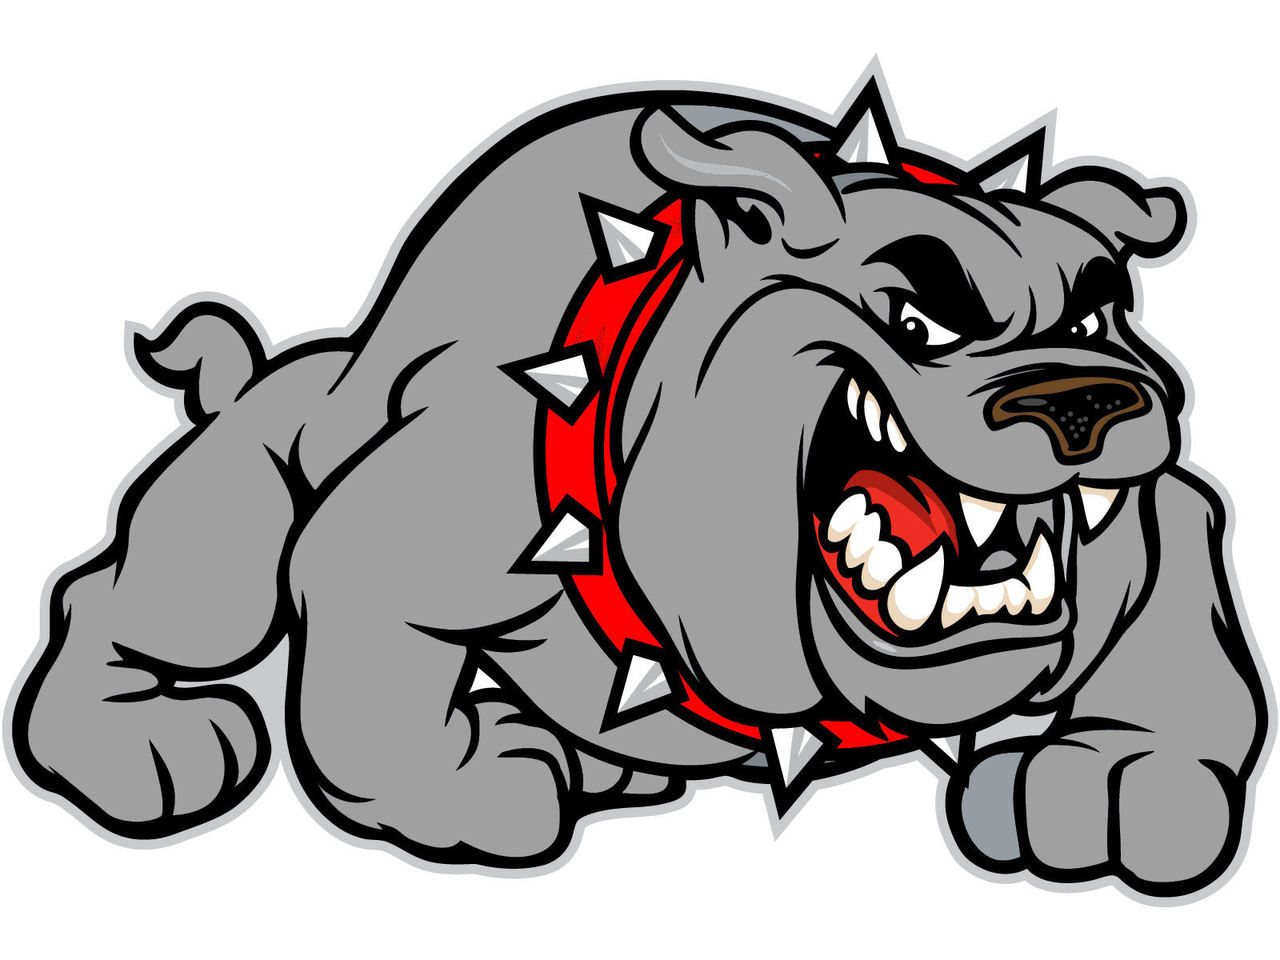 Top Georgia Bulldog Clipart in the world Check it out now 